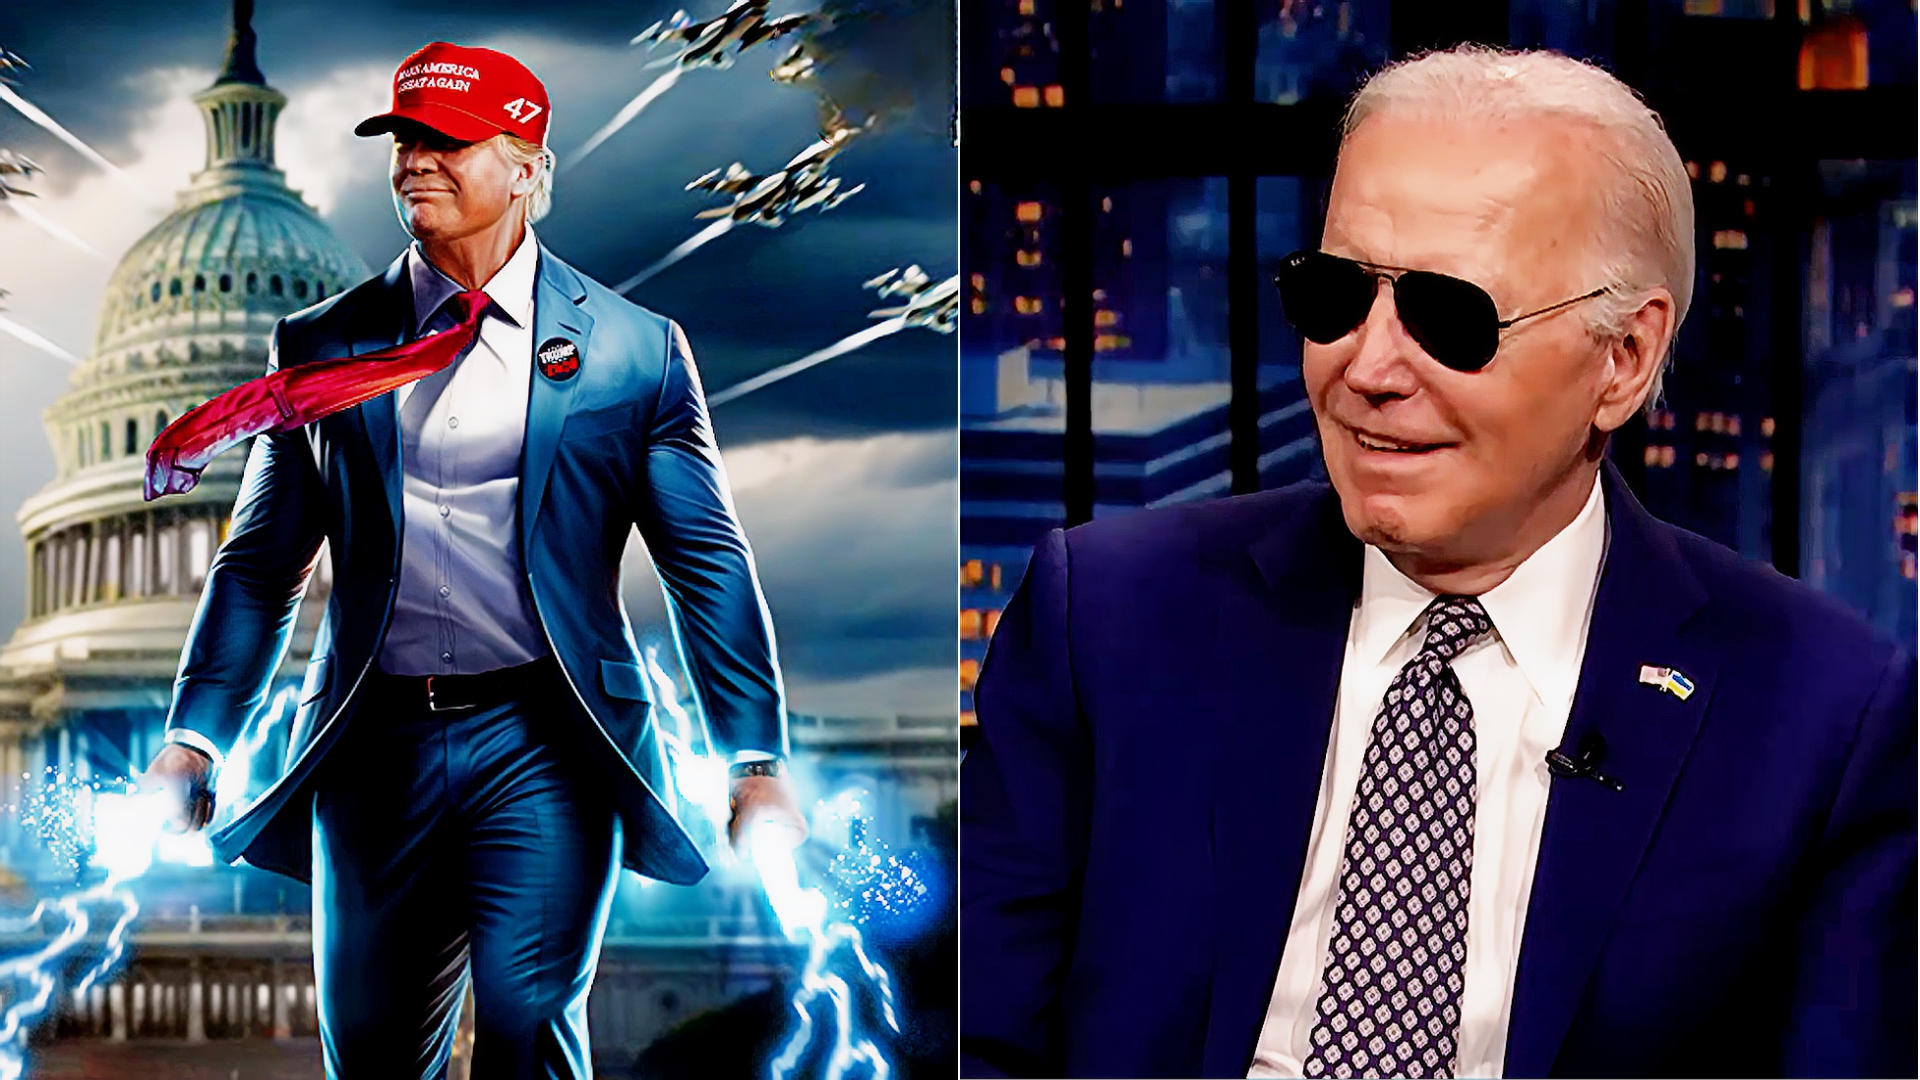 Biden Camp Roasts Trump Dinner With Fans 'Suckered Into Paying' For NFT Trading Cards On Day Off From Court